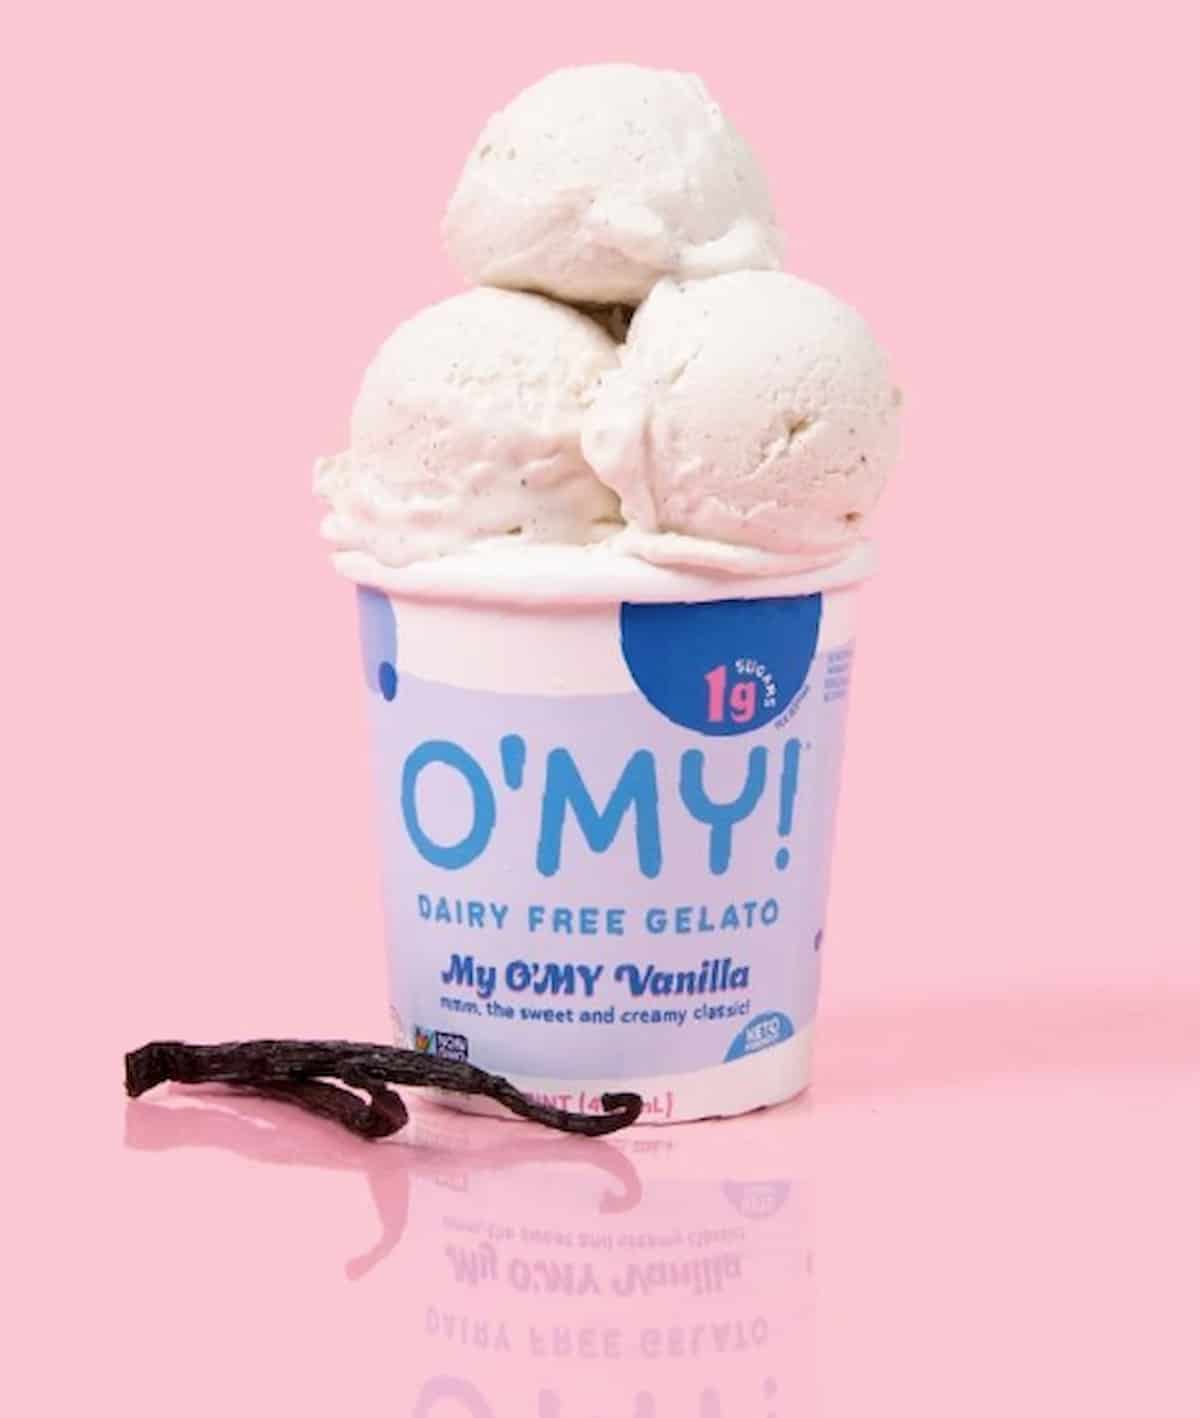 O'My Dairy-Free Gelato pint with three scoops on top and vanilla beans beside it.